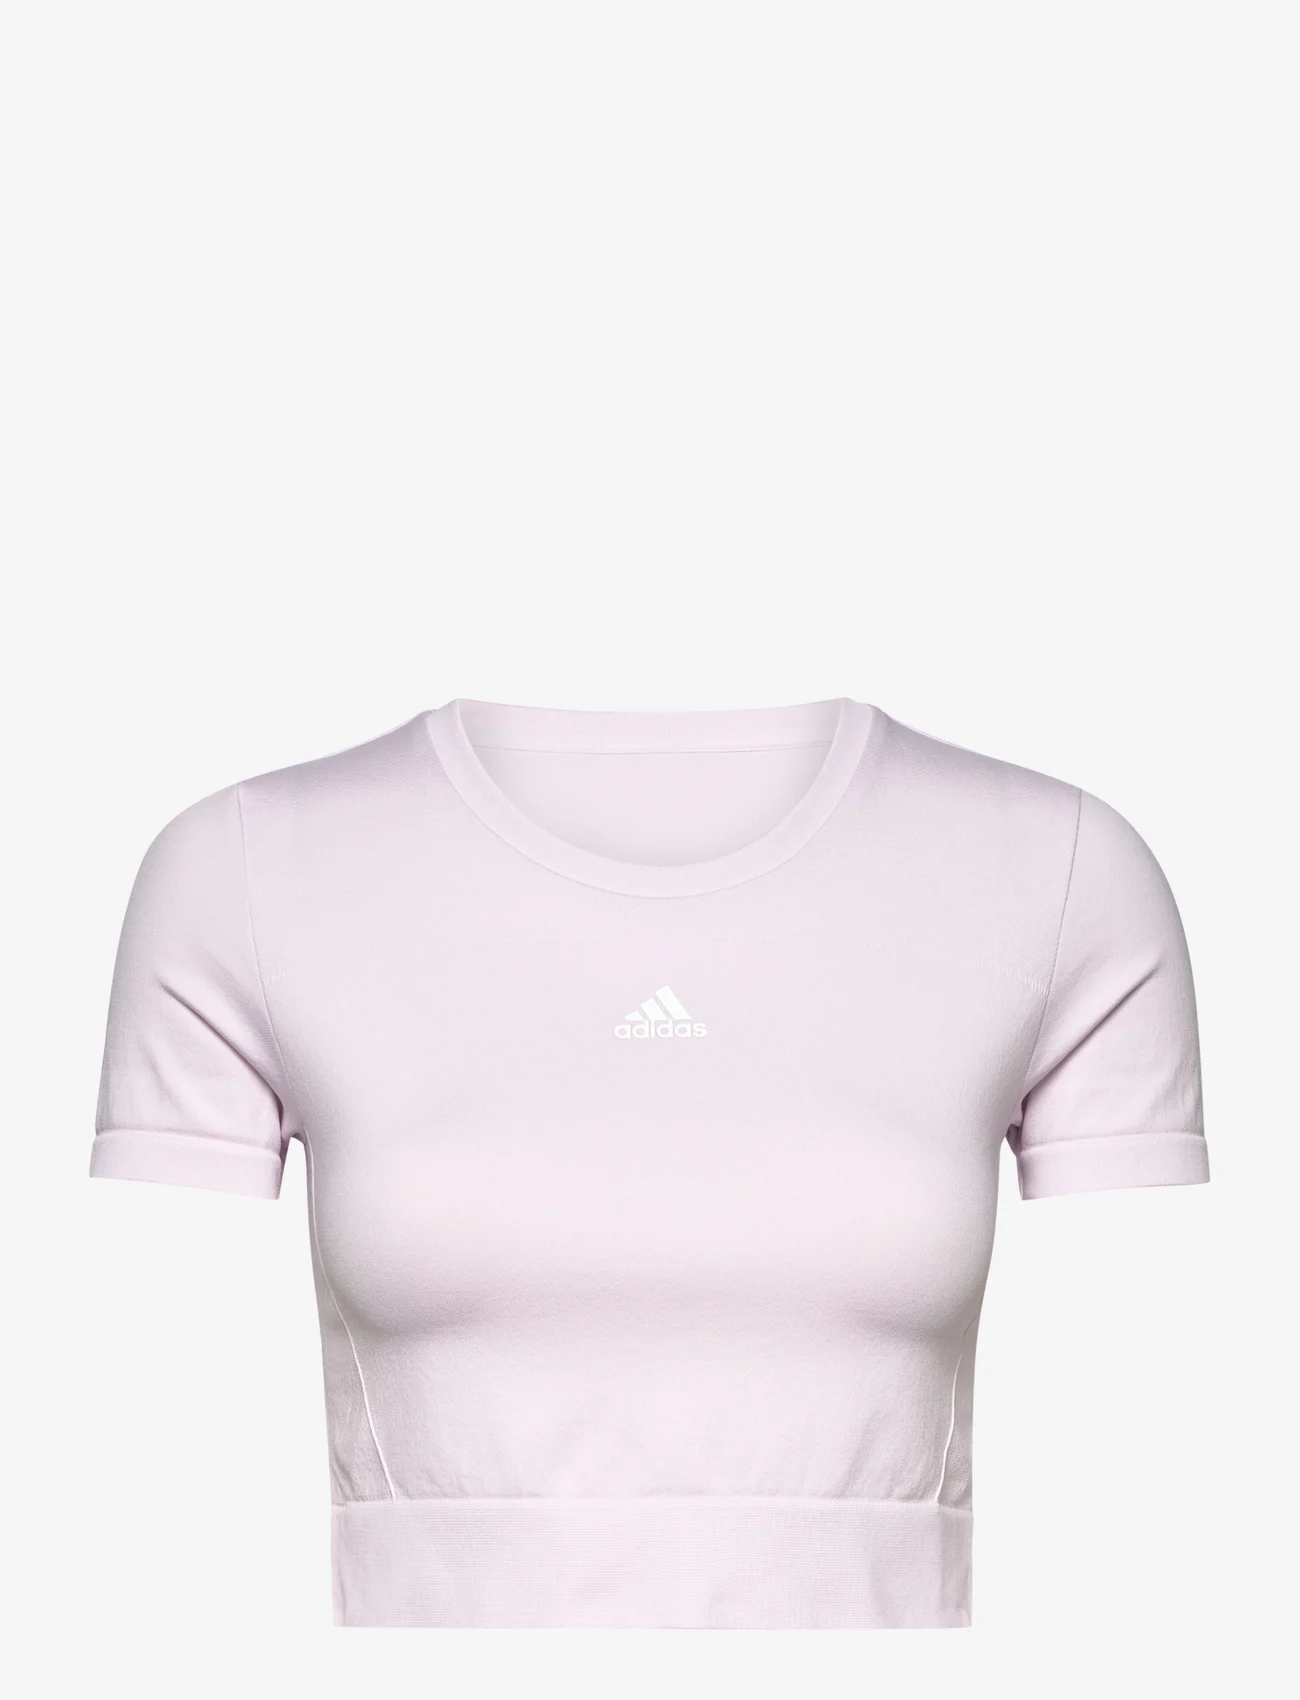 adidas Performance - AEROKNIT Seamless Fitted Cropped Tee W - t-shirt & tops - almpnk/white - 0